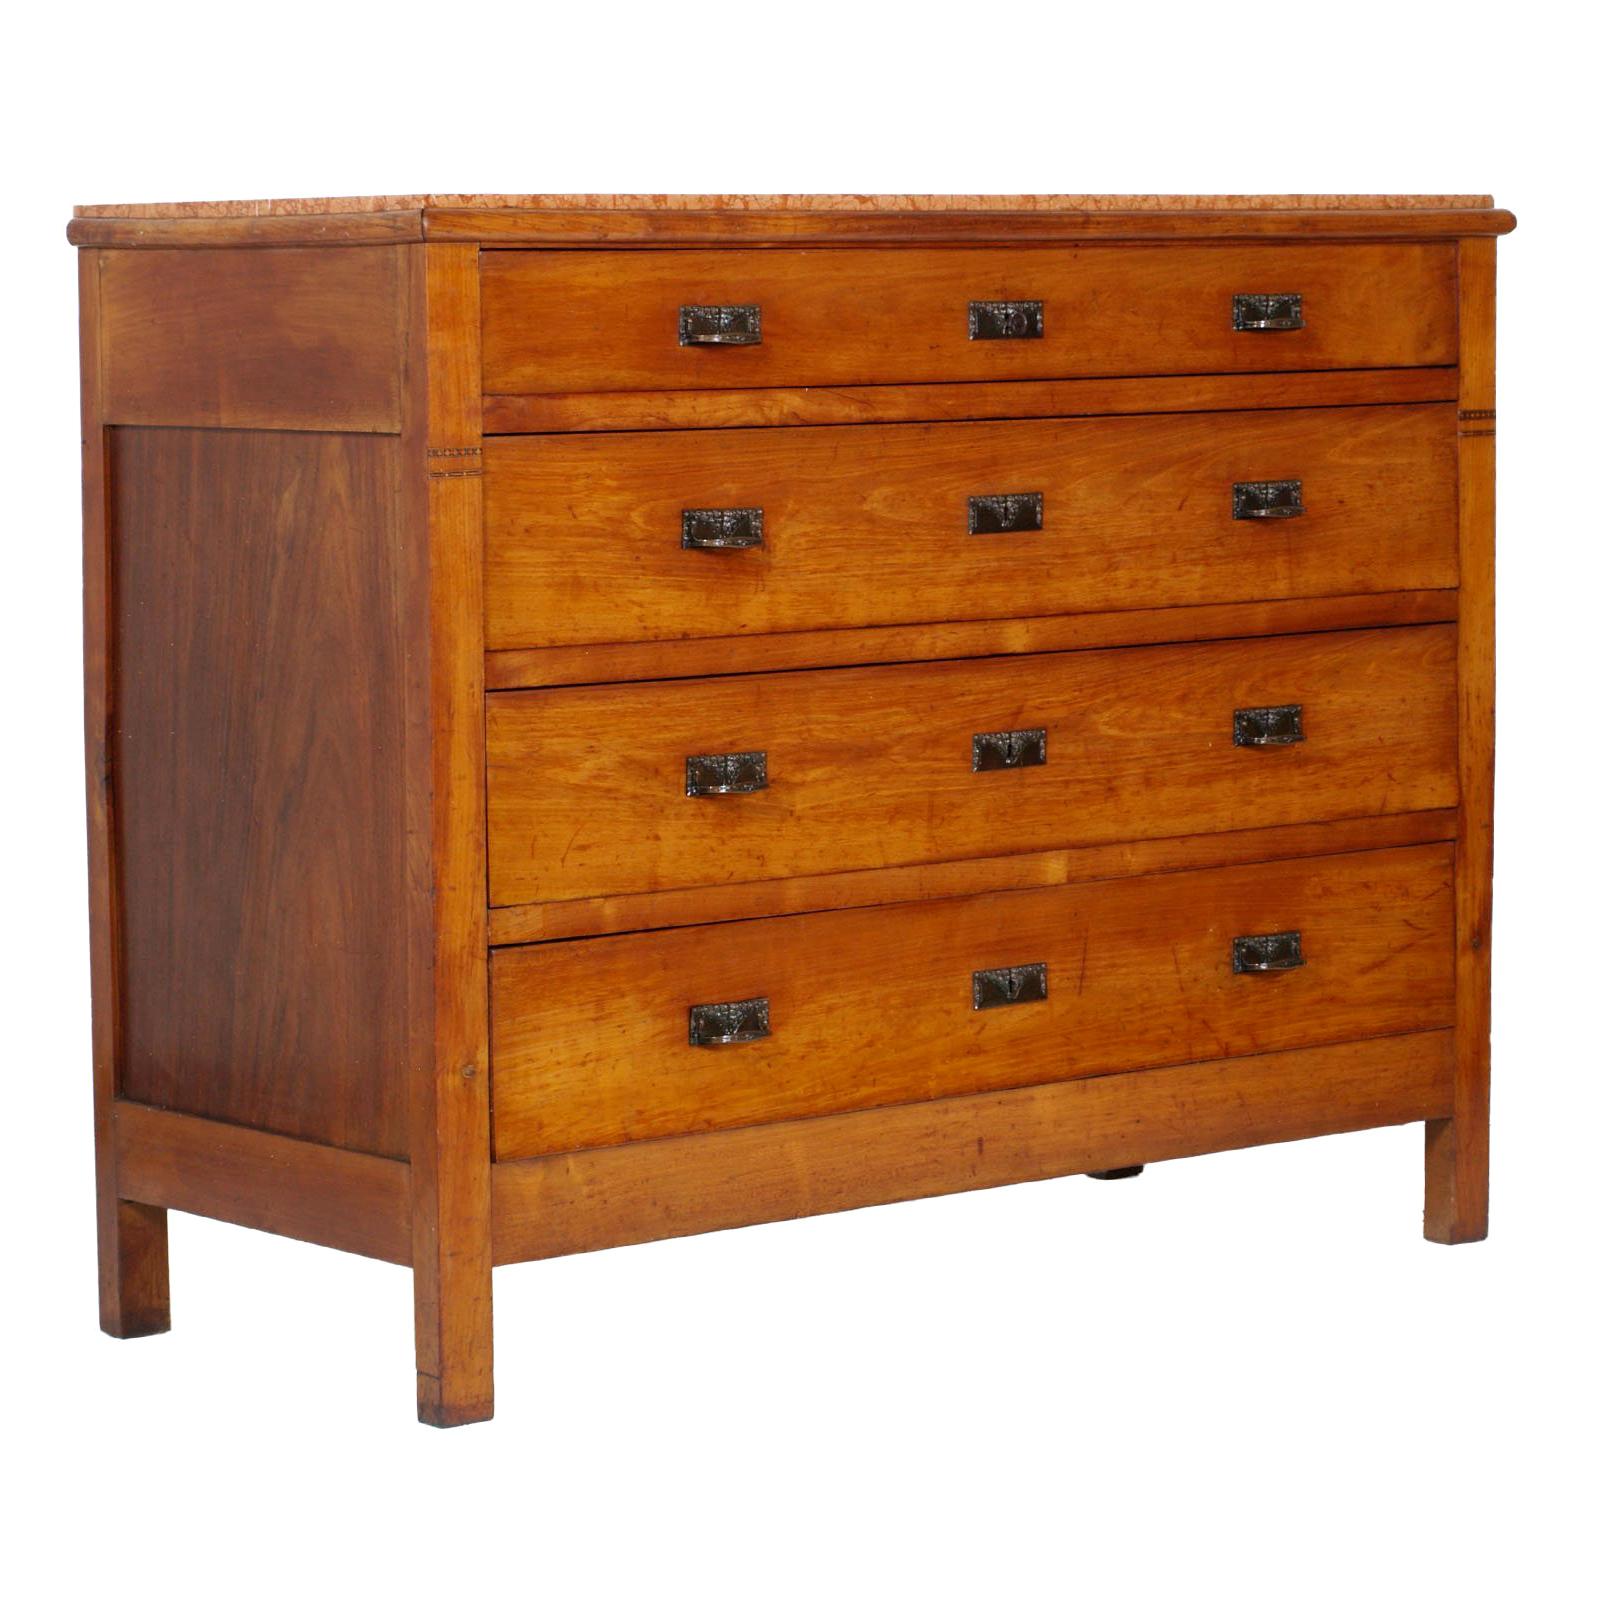 1910s Art Nouveau Chest of Drawers in Cherrywood, Marble Top, wax polished For Sale